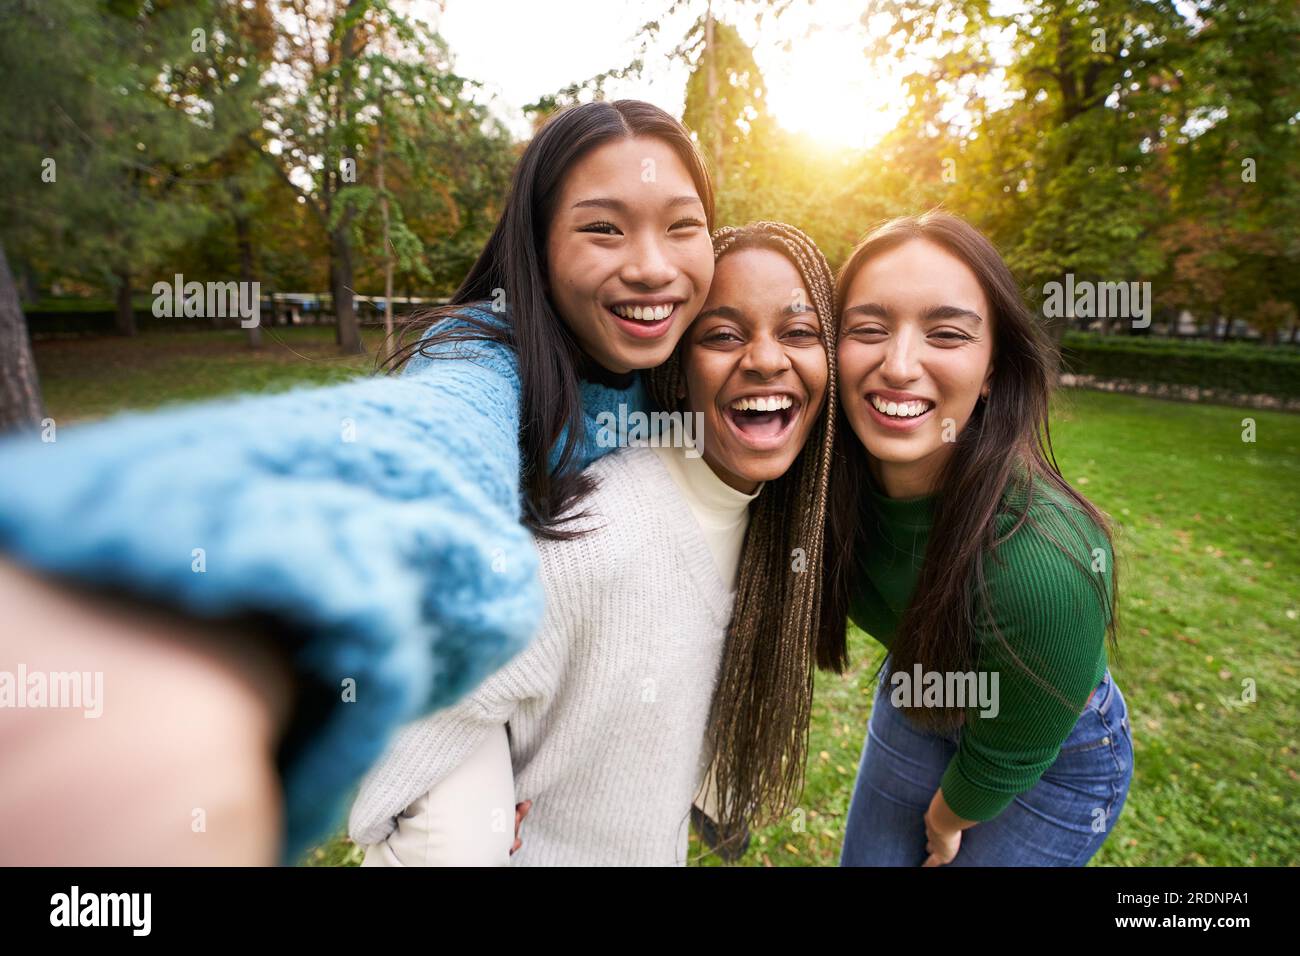 Portrait of three girls outdoor taking selfie. Friendship in multi-ethnic groups multiracial people Stock Photo